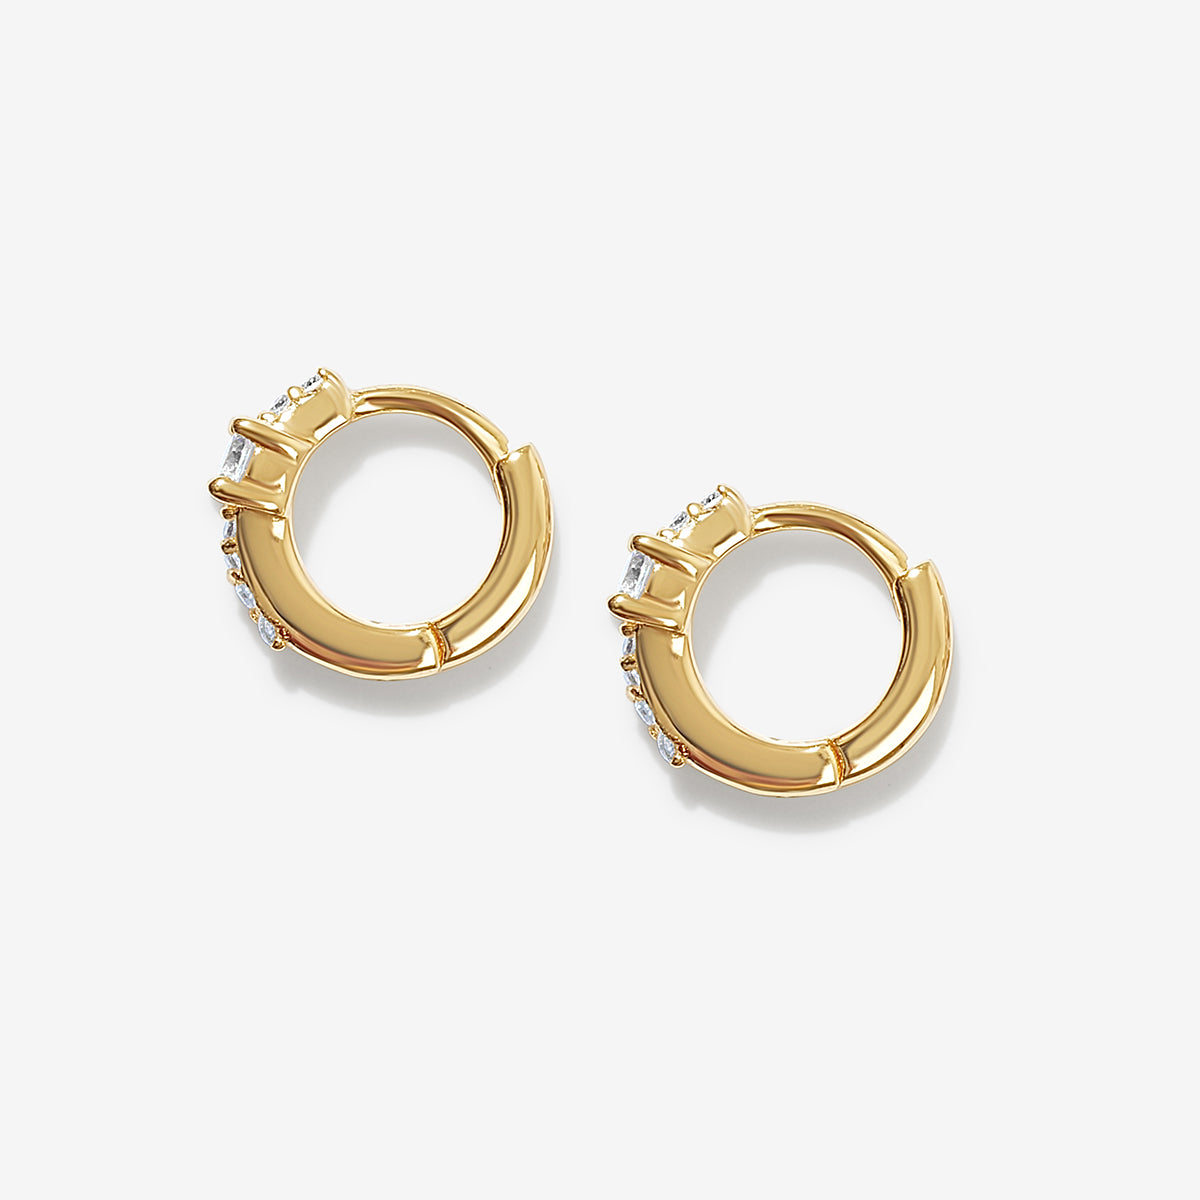 Gold Jackson Huggie Earrings | Crystal Compliments Collection | Adornmonde